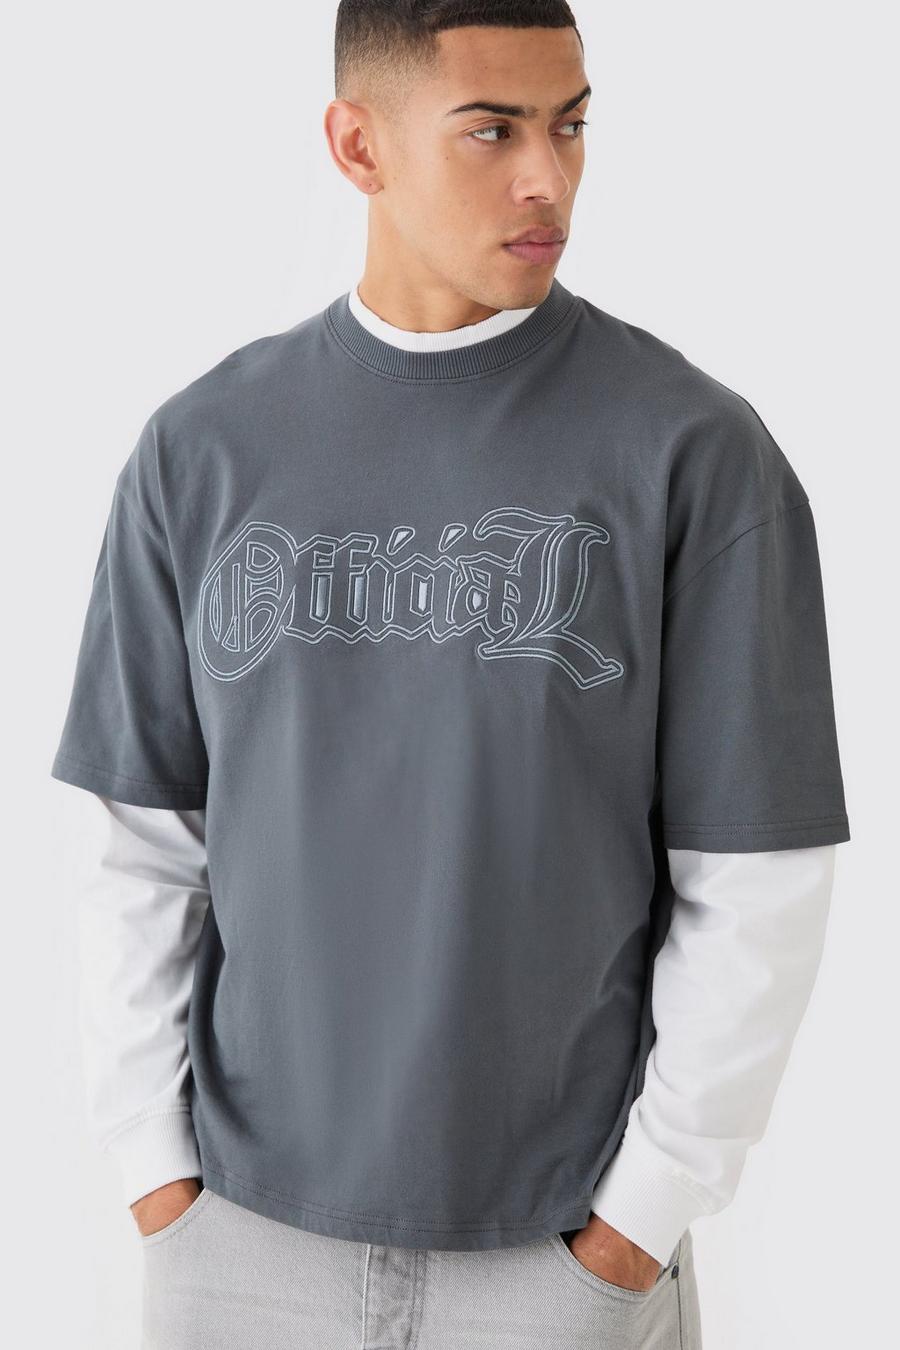 Kastiges Oversize T-Shirt mit Official-Stickerei, Charcoal